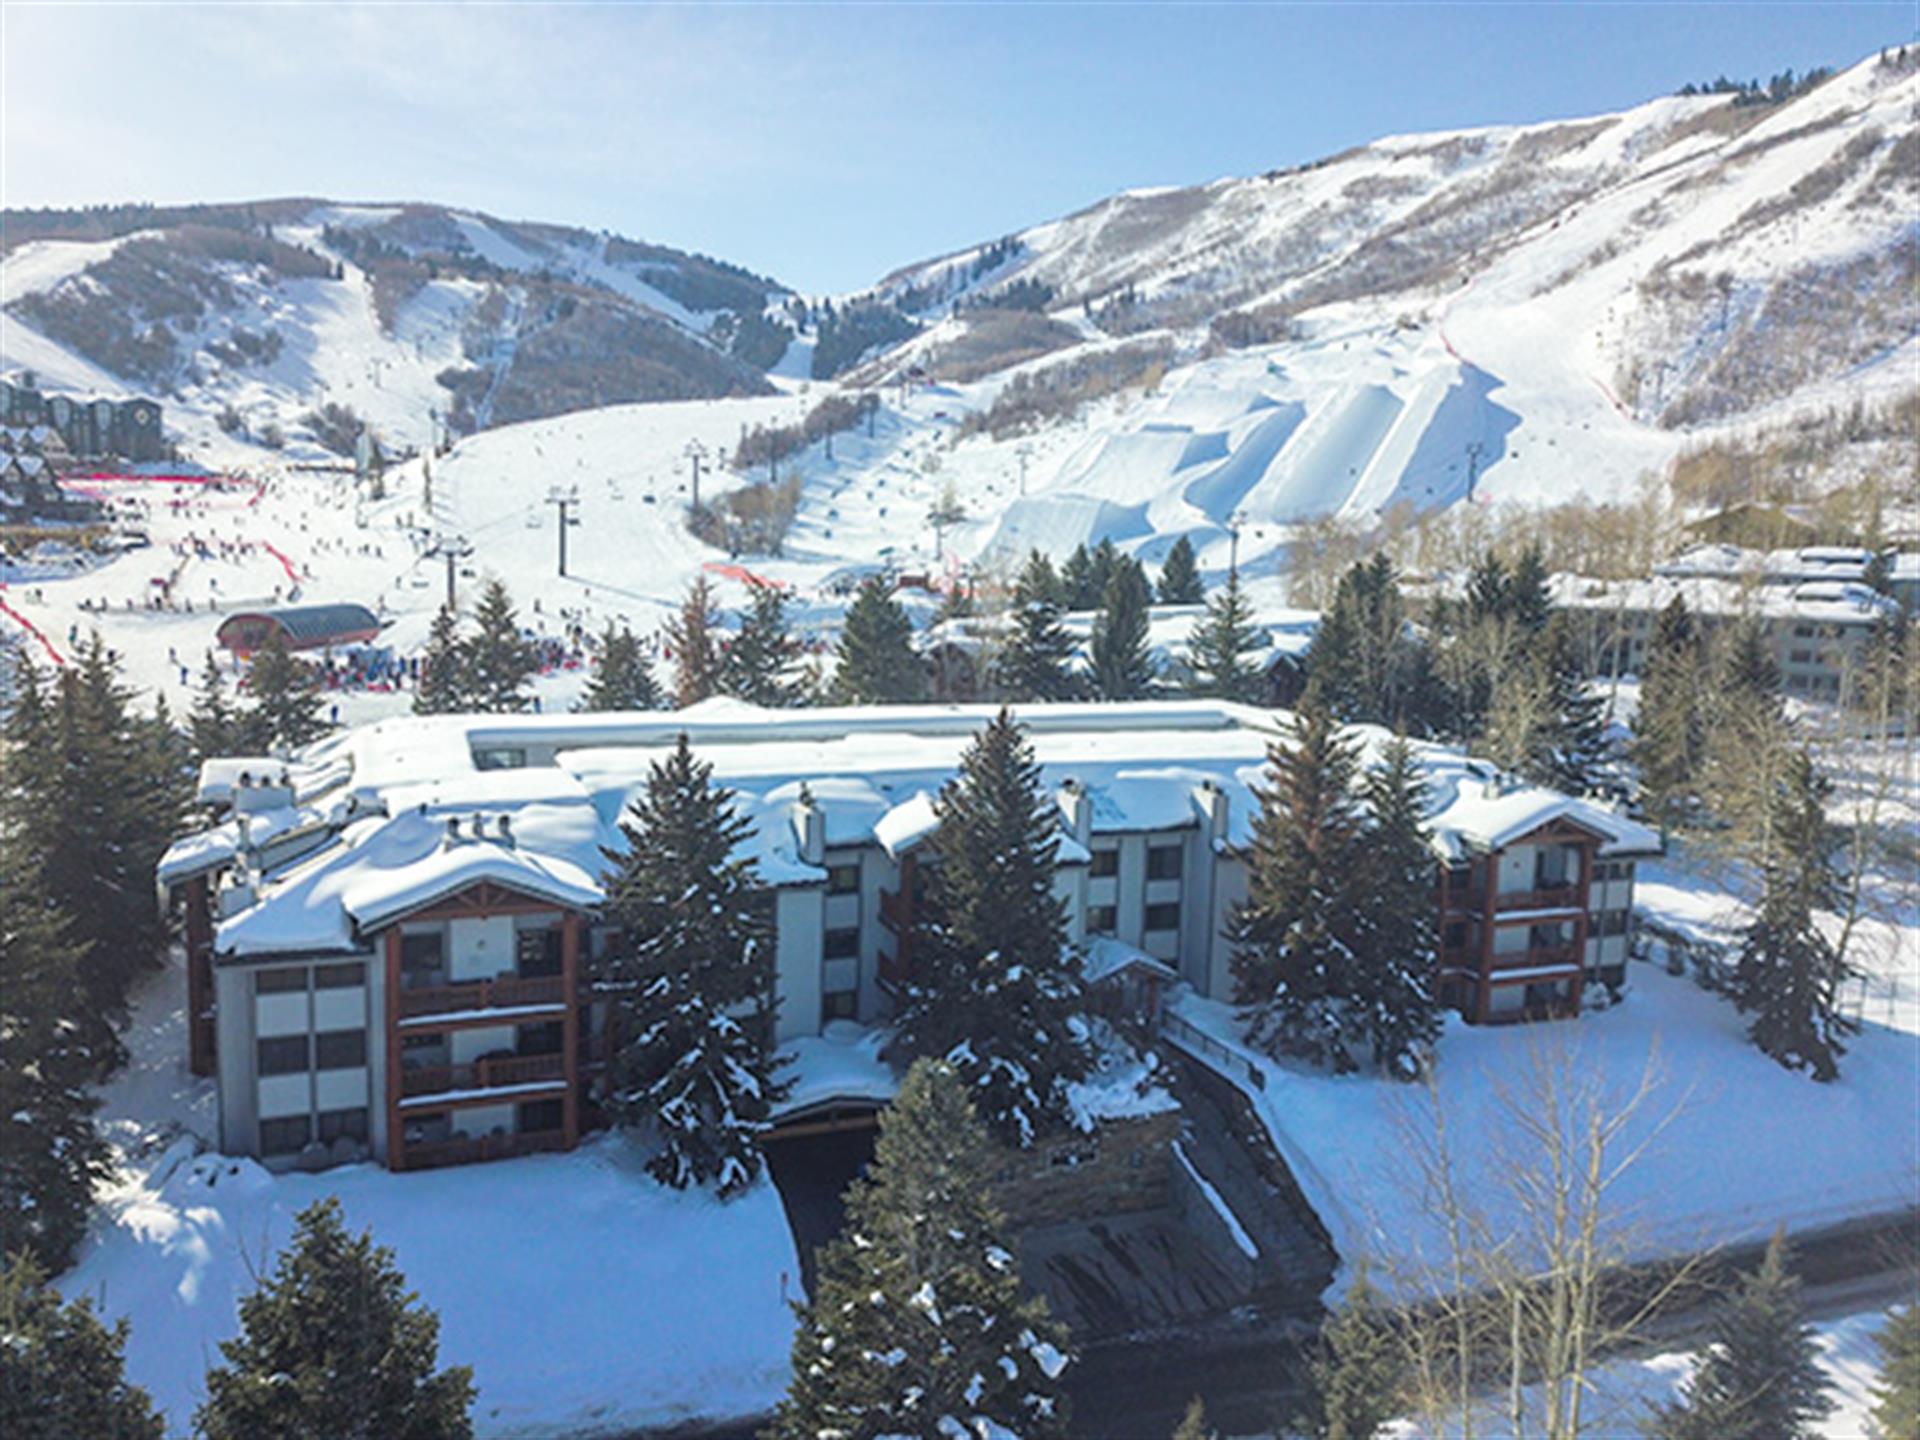 Snow Flower Condominium SkiInSkiOut accommodations at the base of Park City Mountain Resort